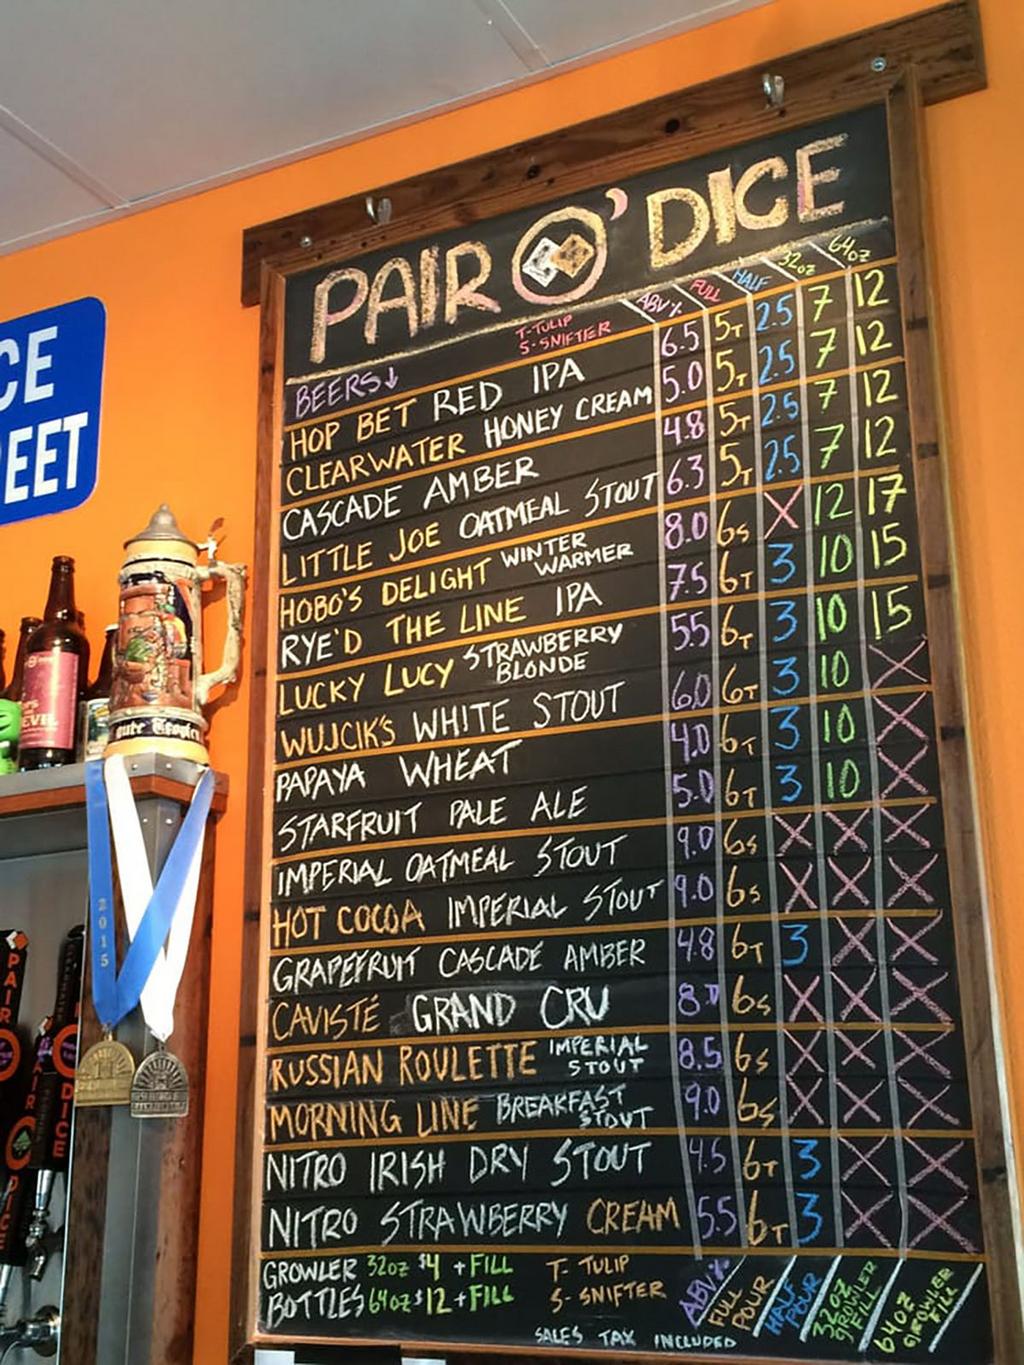 Pair O' Dice Brewing Co. Expands Distribution to South Florida